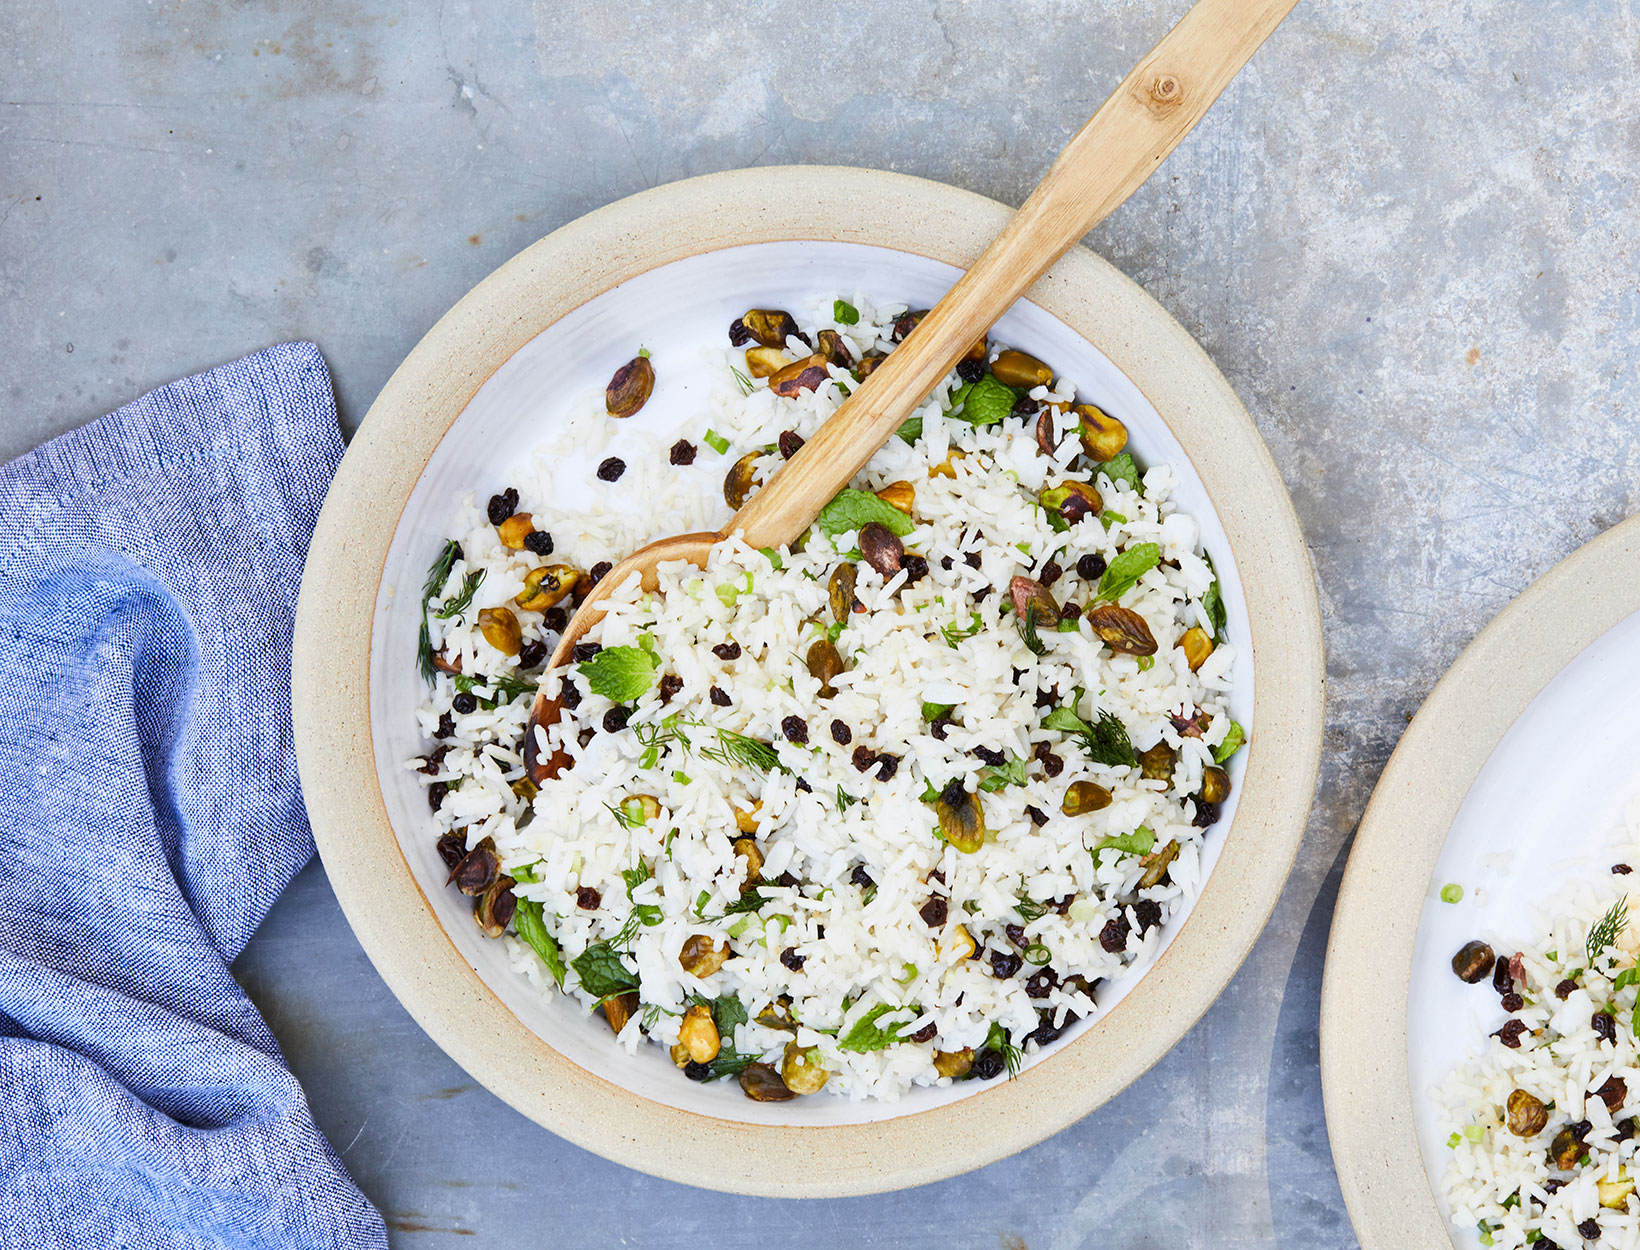 Herbed Rice Salad with Currants and Pistachios